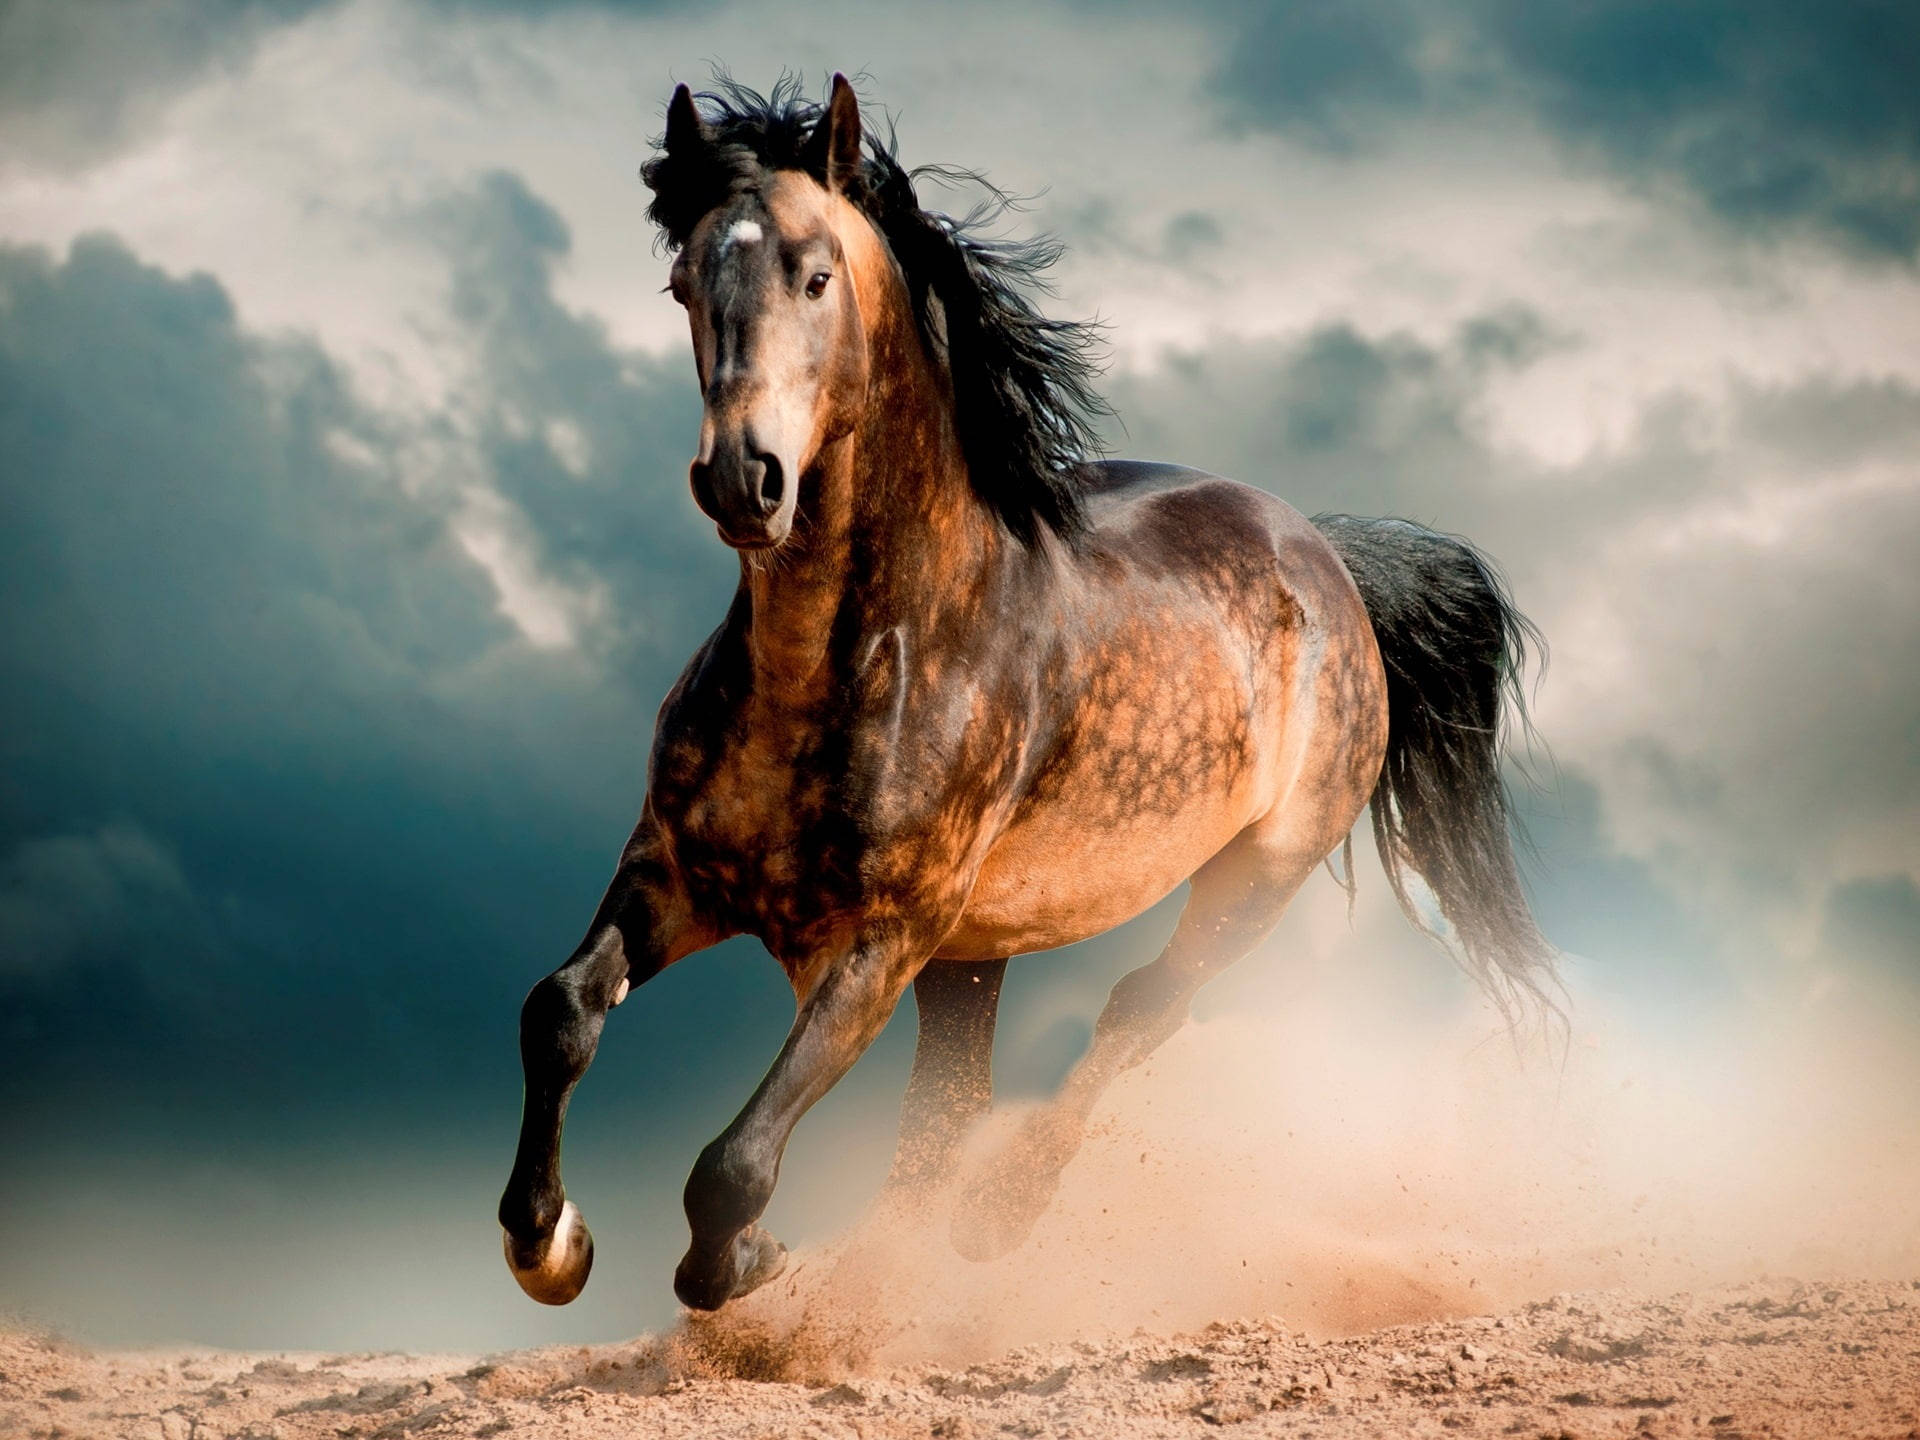 500+] Horse Wallpapers for FREE 